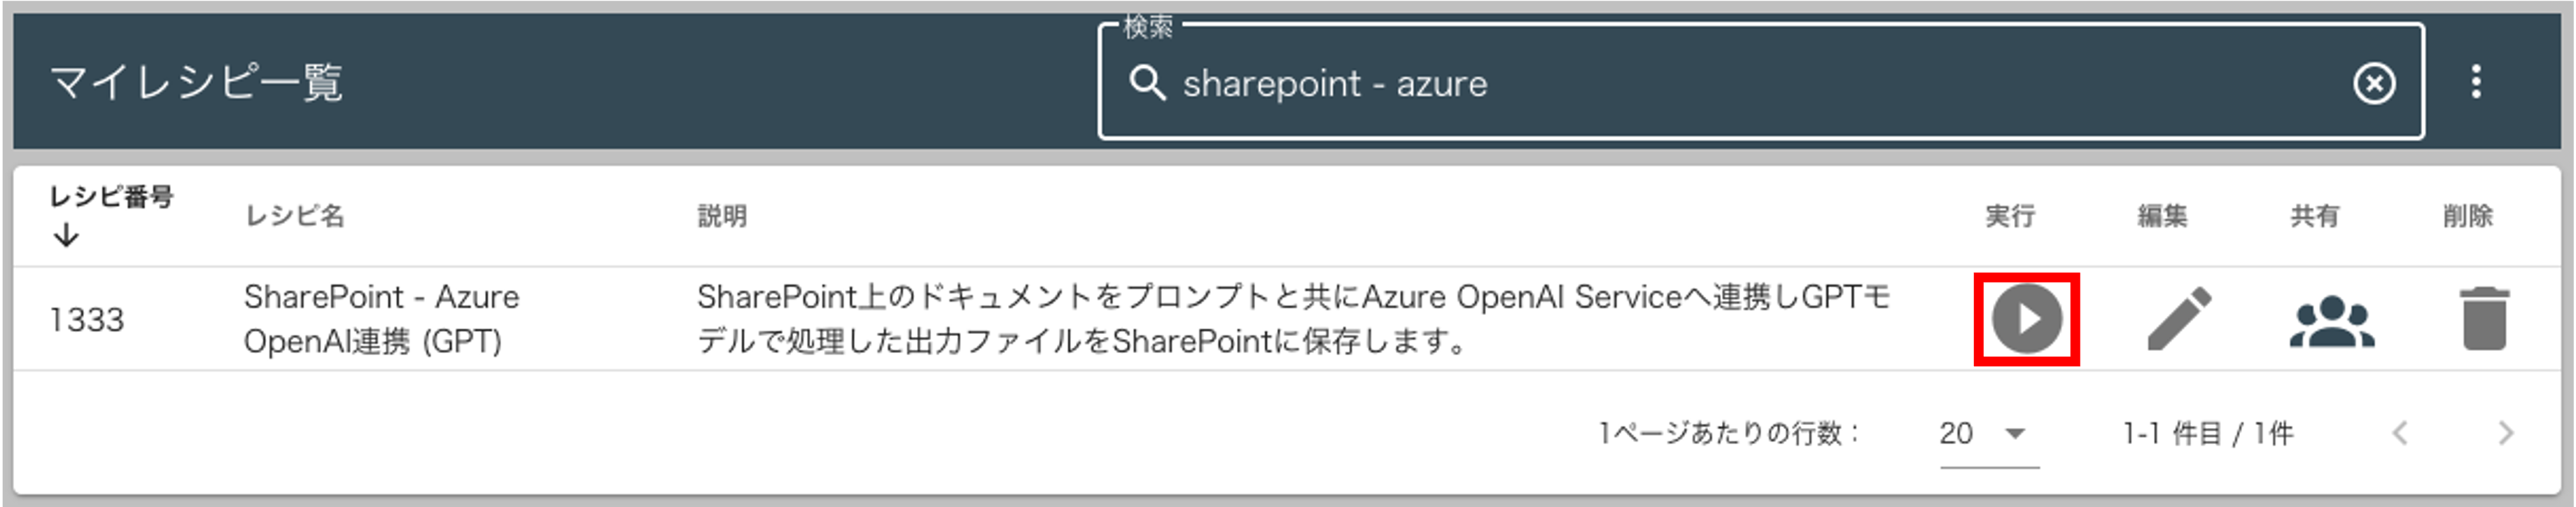 SharePoint04.png